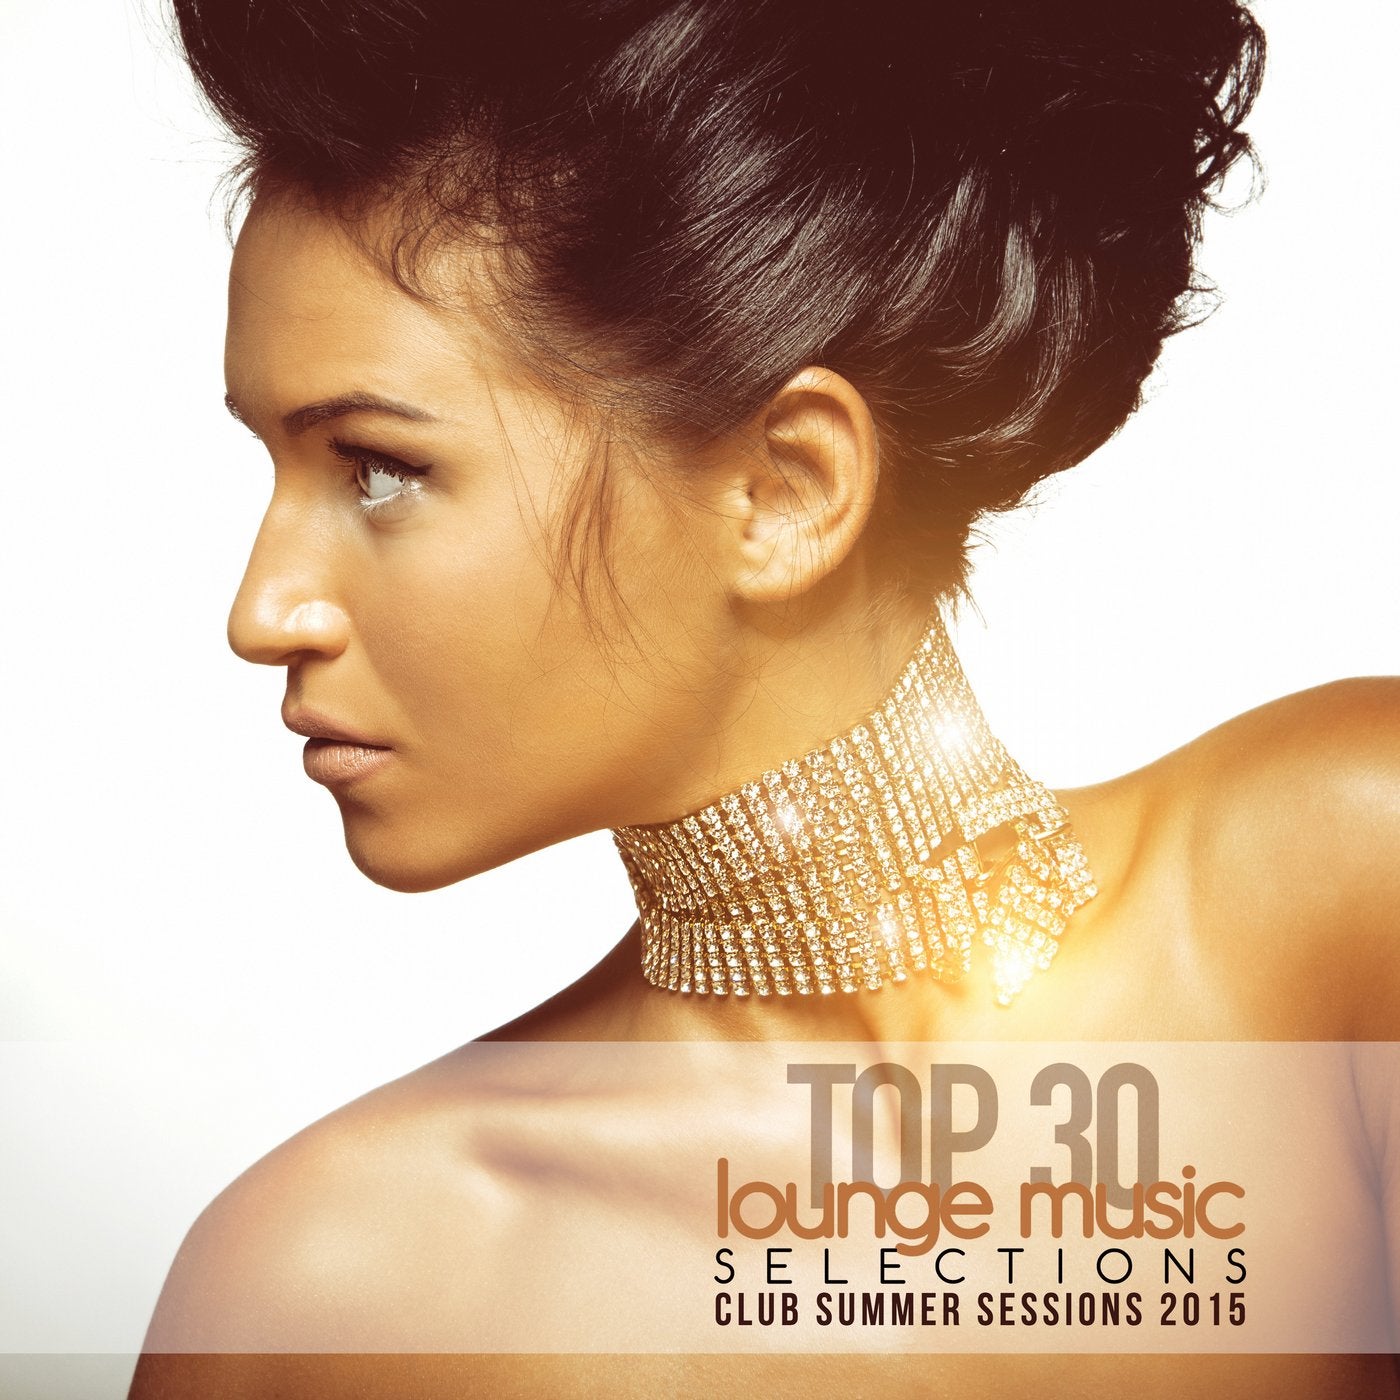 Top 30 Lounge Music Selections - Club Summer Sessions 2015